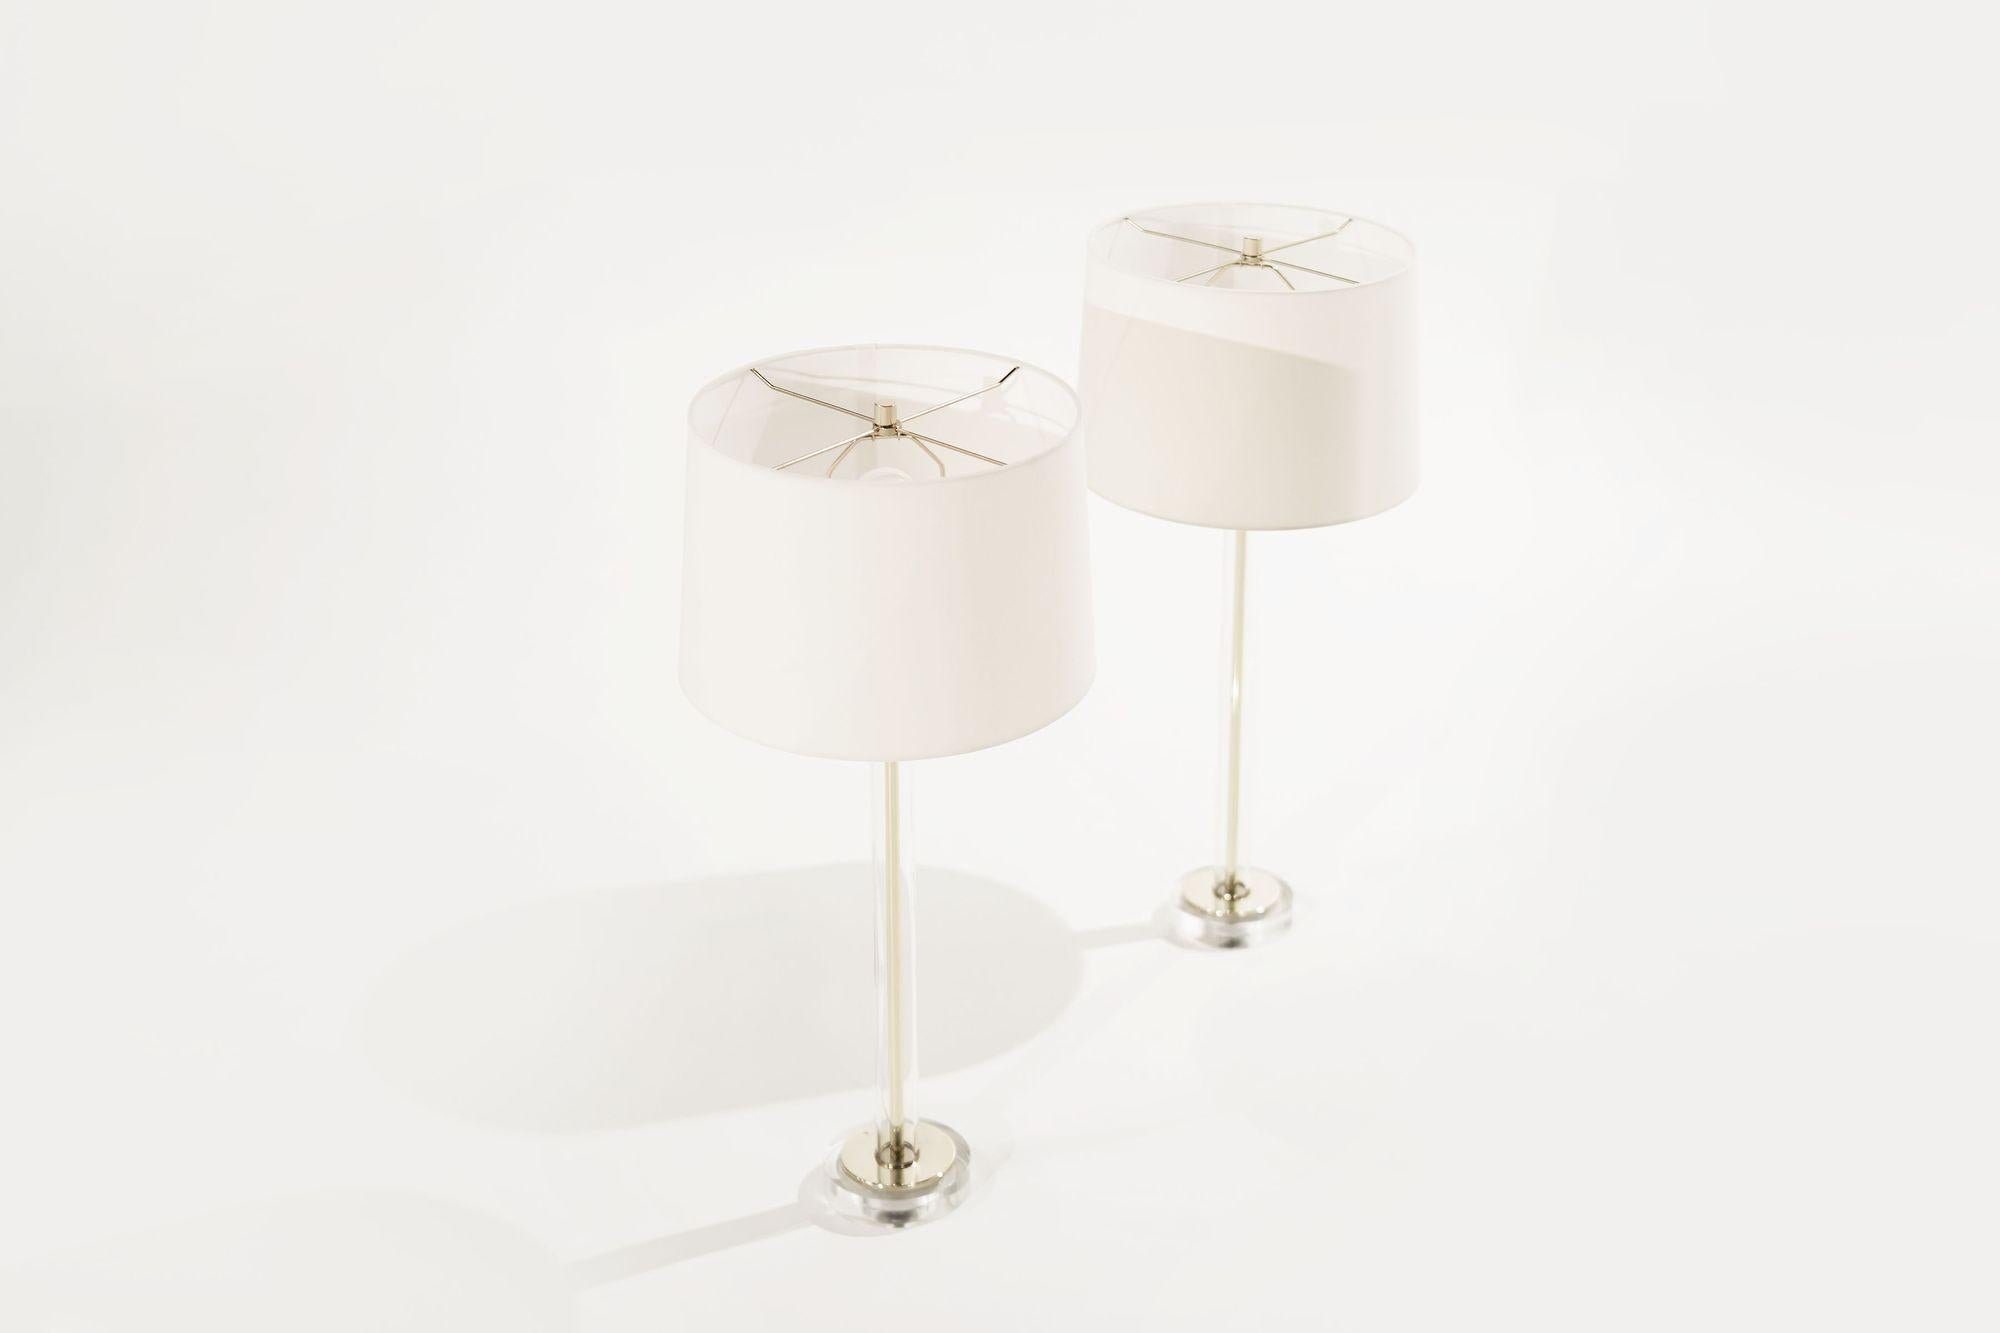 American Glass and Brass Table Lamps, C. 1960s For Sale